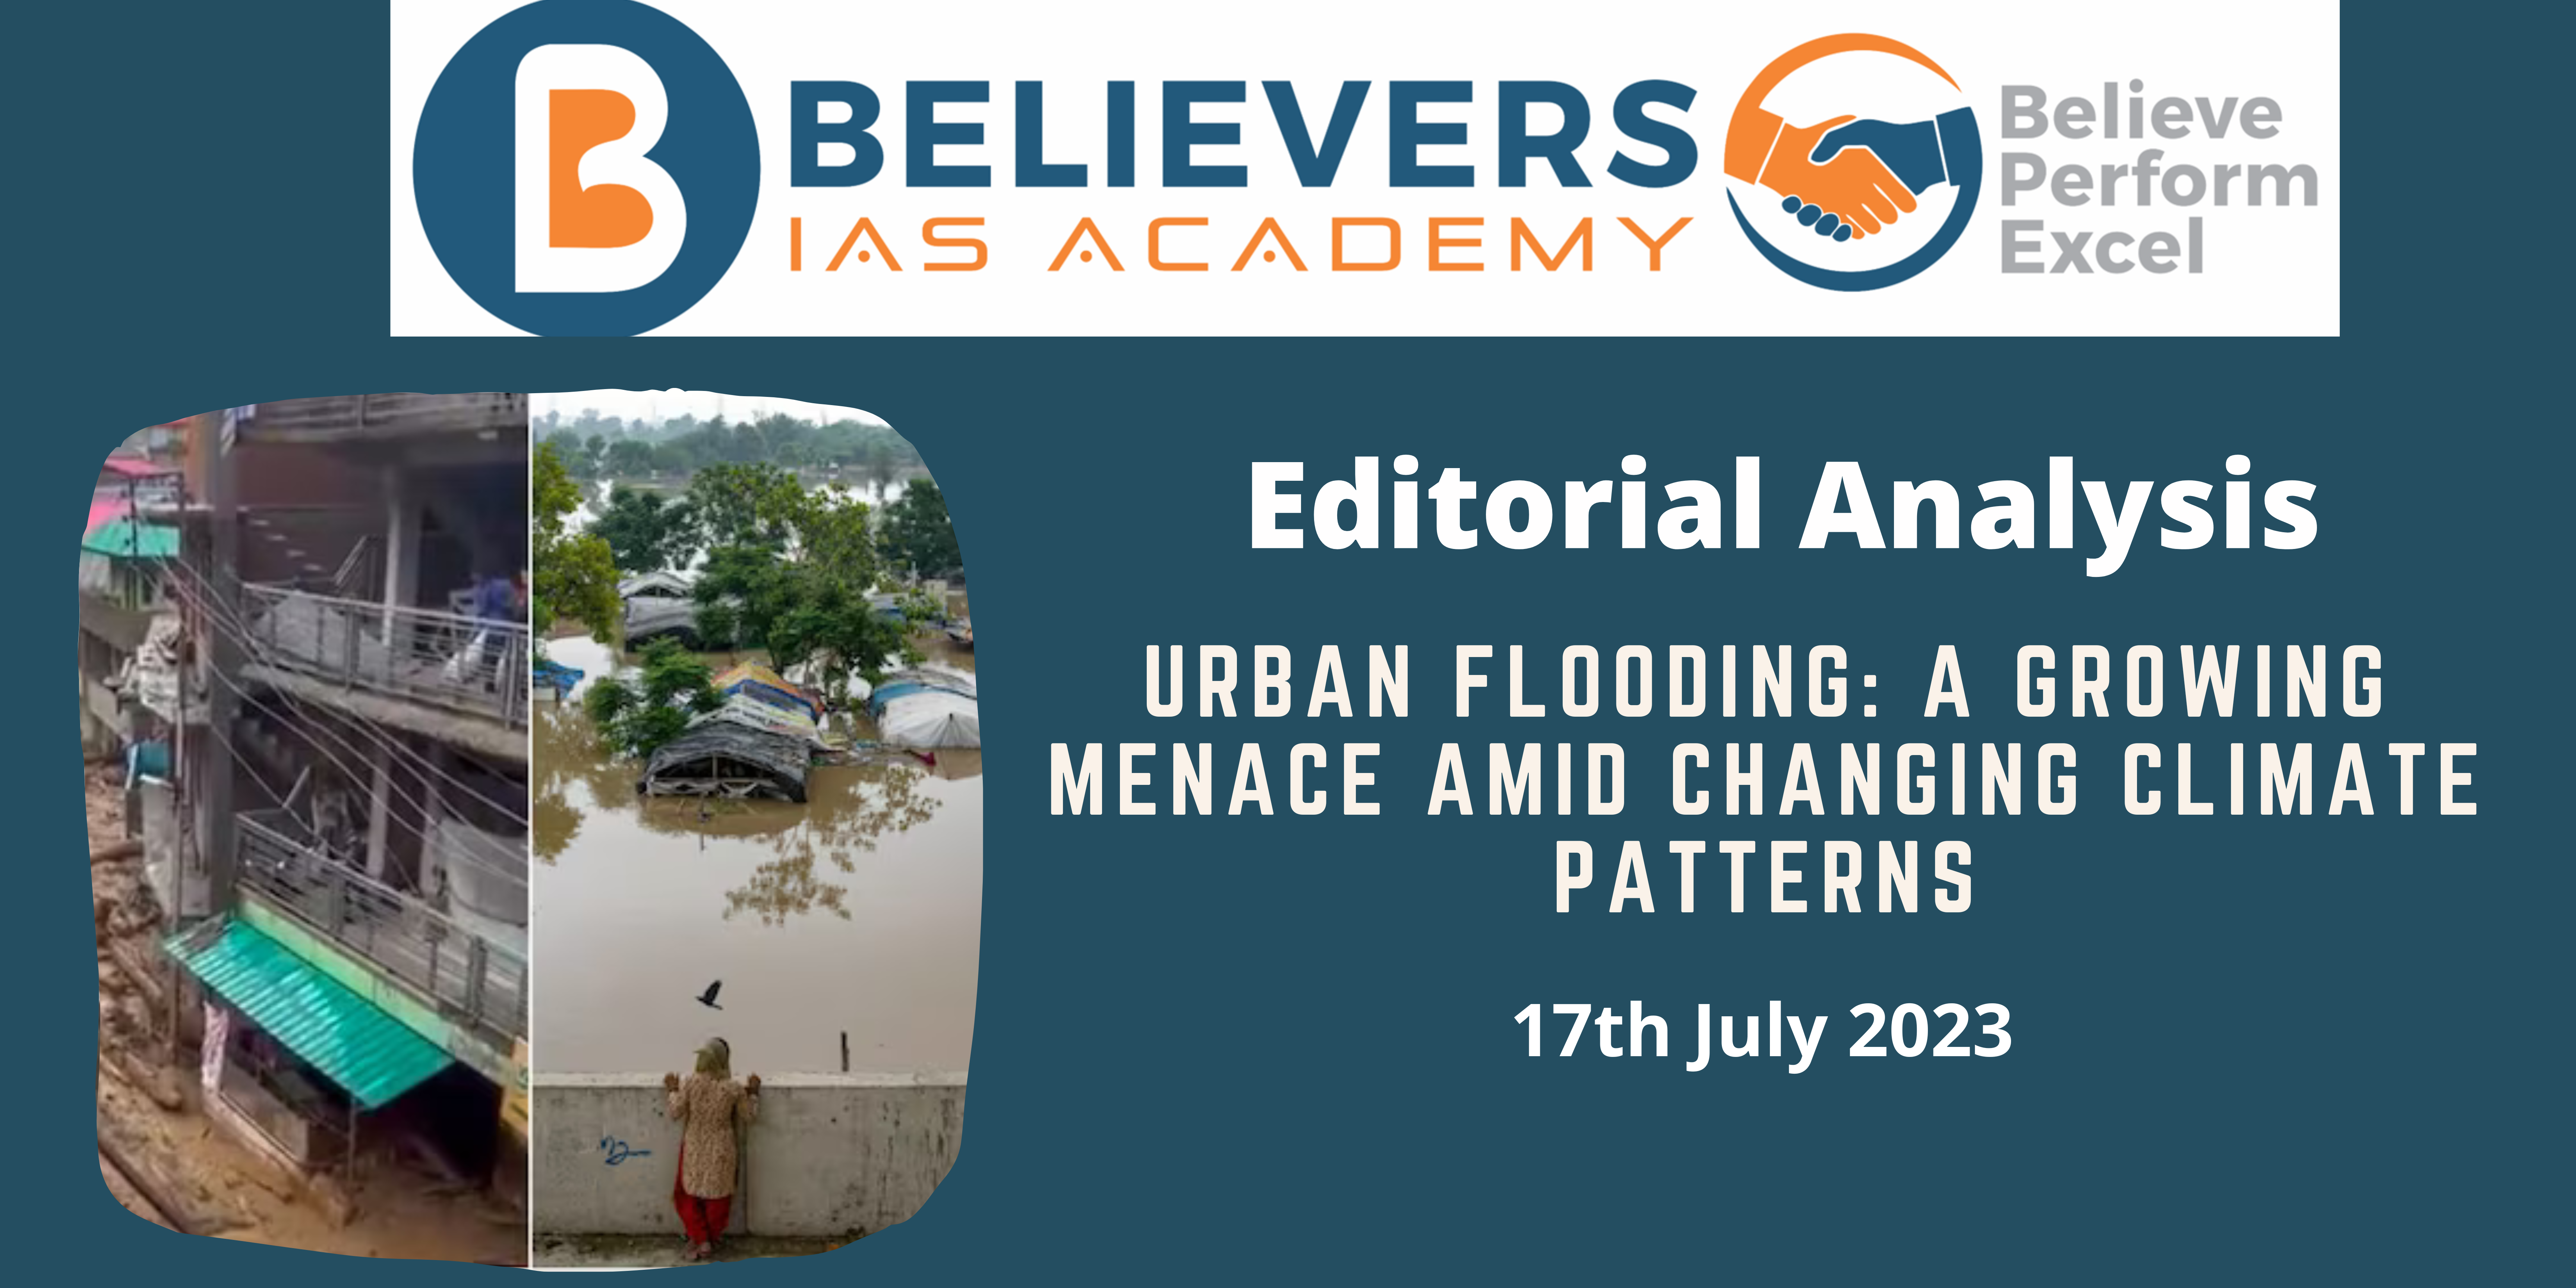 rban Flooding: A Growing Menace Amid Changing Climate Patterns